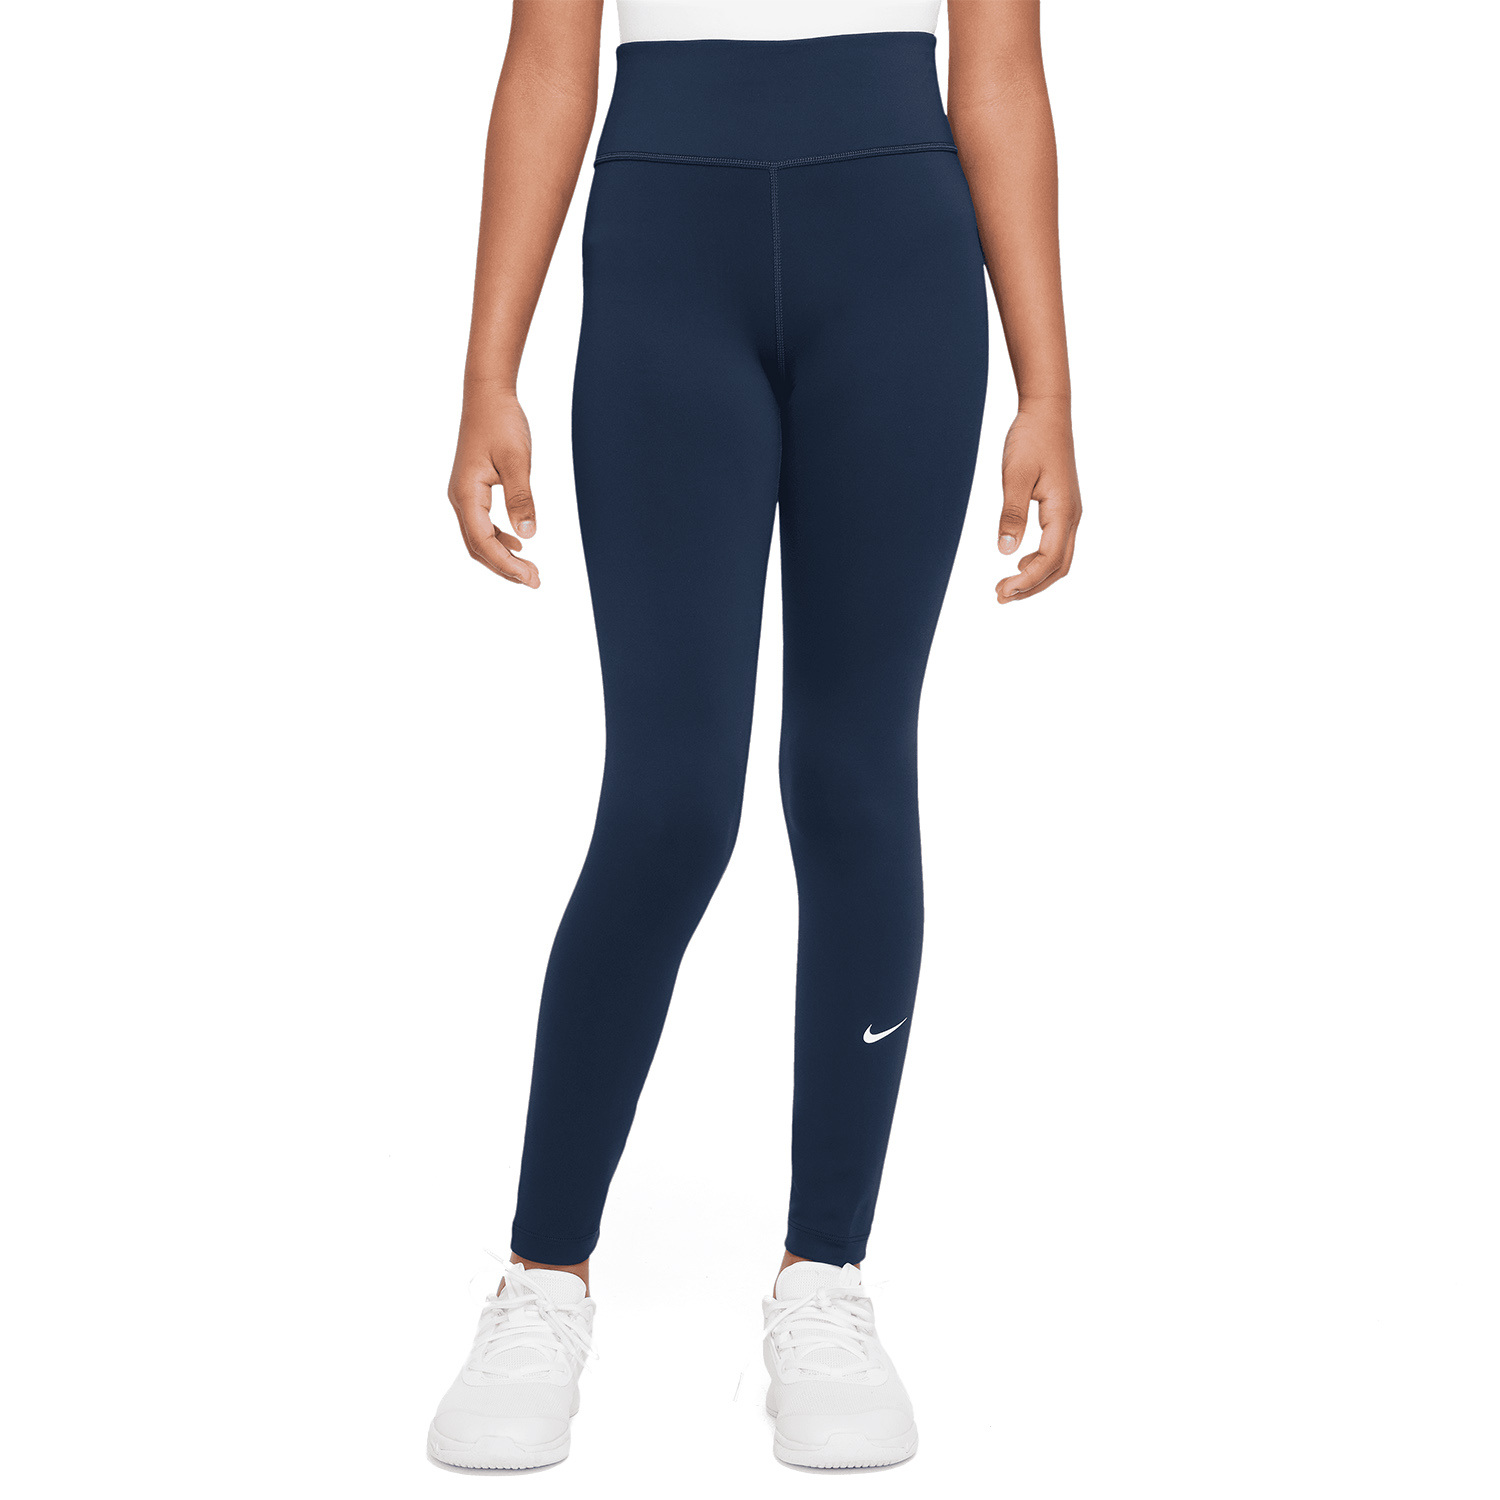 Nike Dri-FIT One Tights Girl - Midnight Navy/White